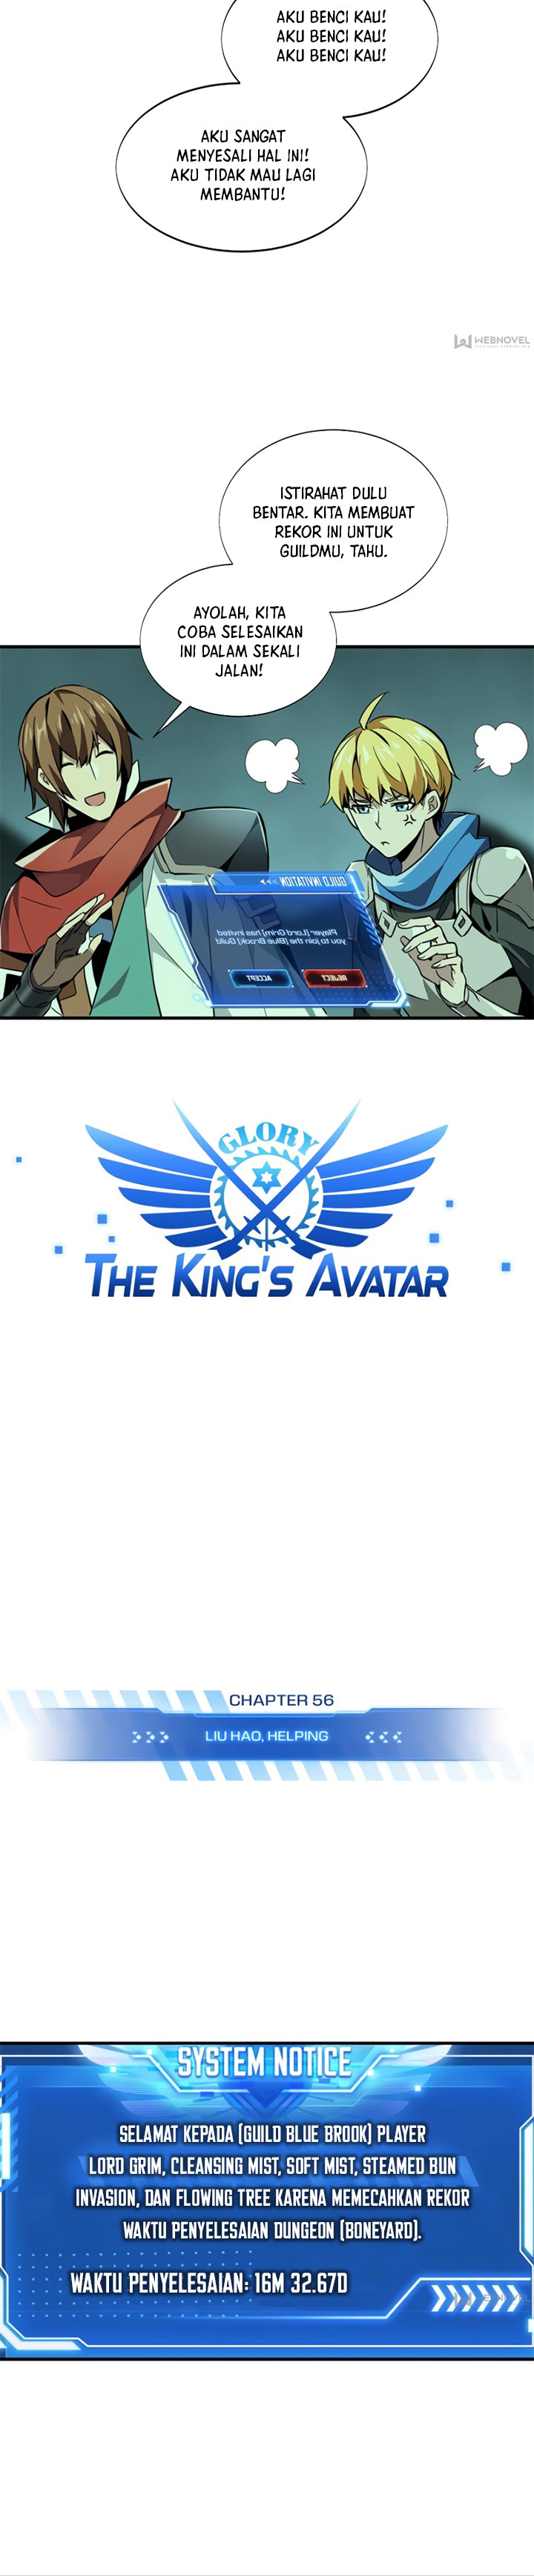 The King’s Avatar (2020) Chapter 56